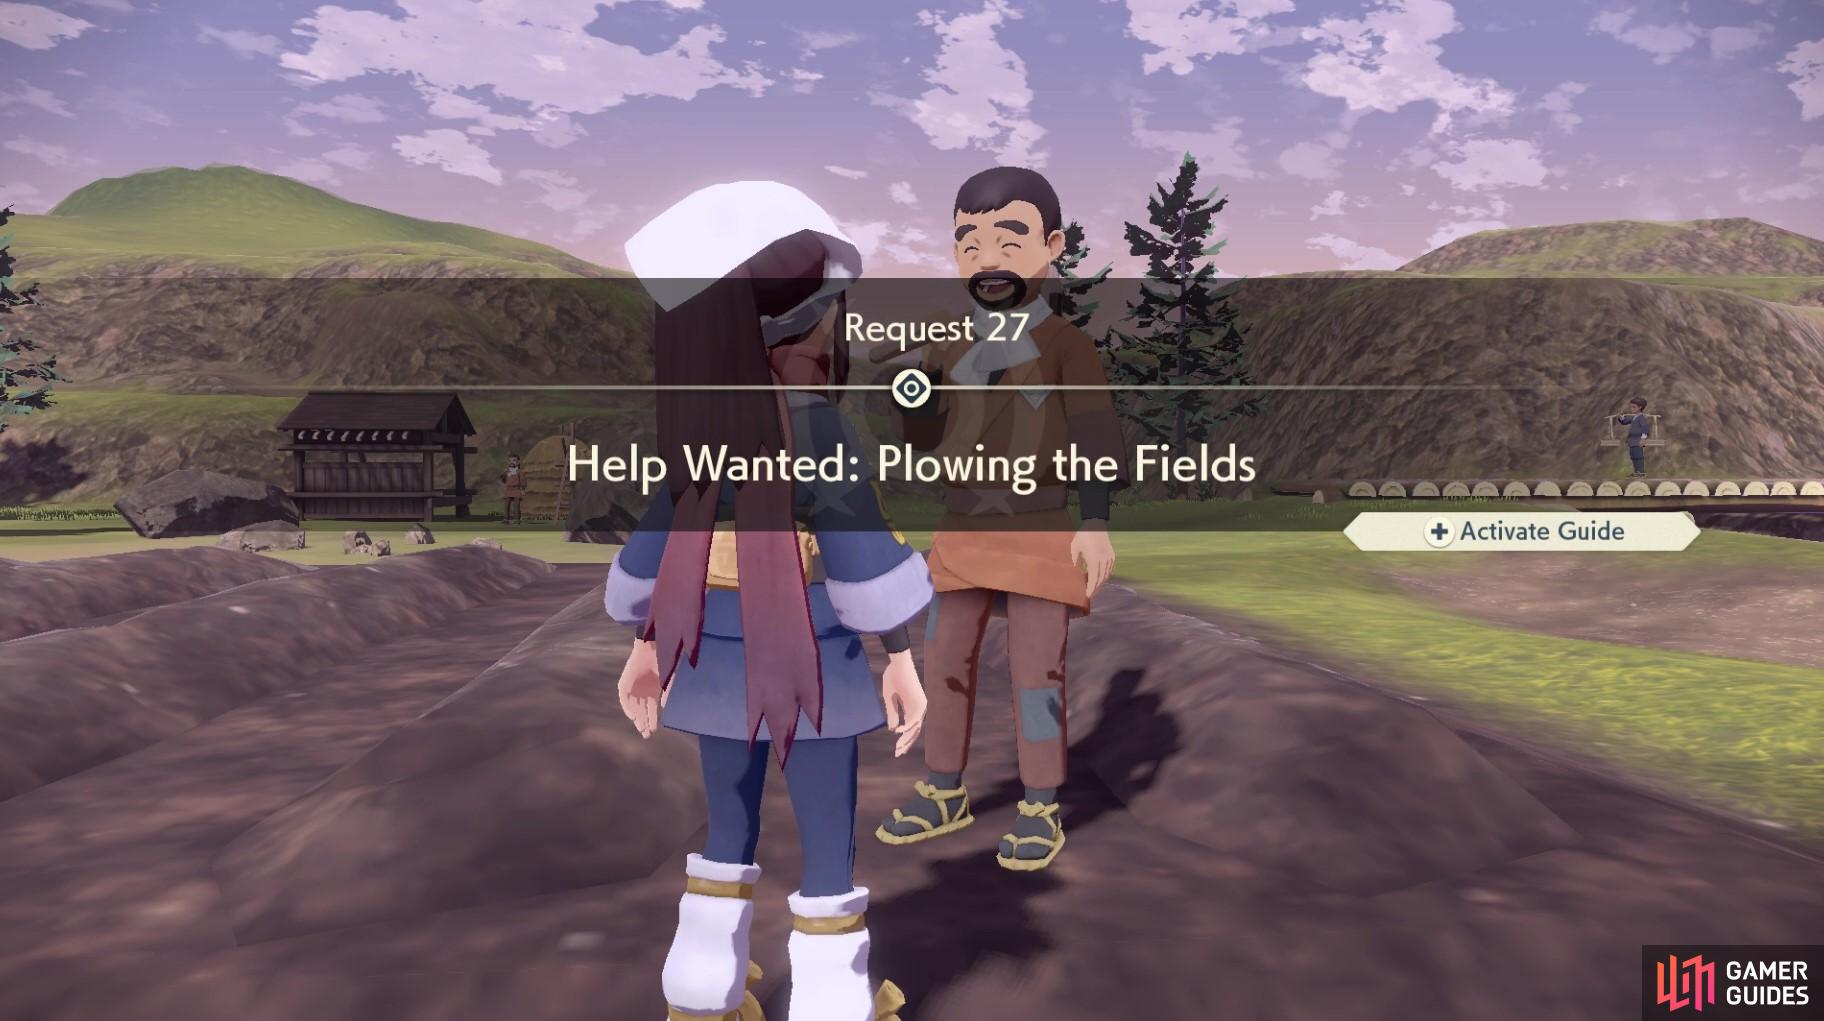 Request 27: Help Wanted: Plowing the Fields